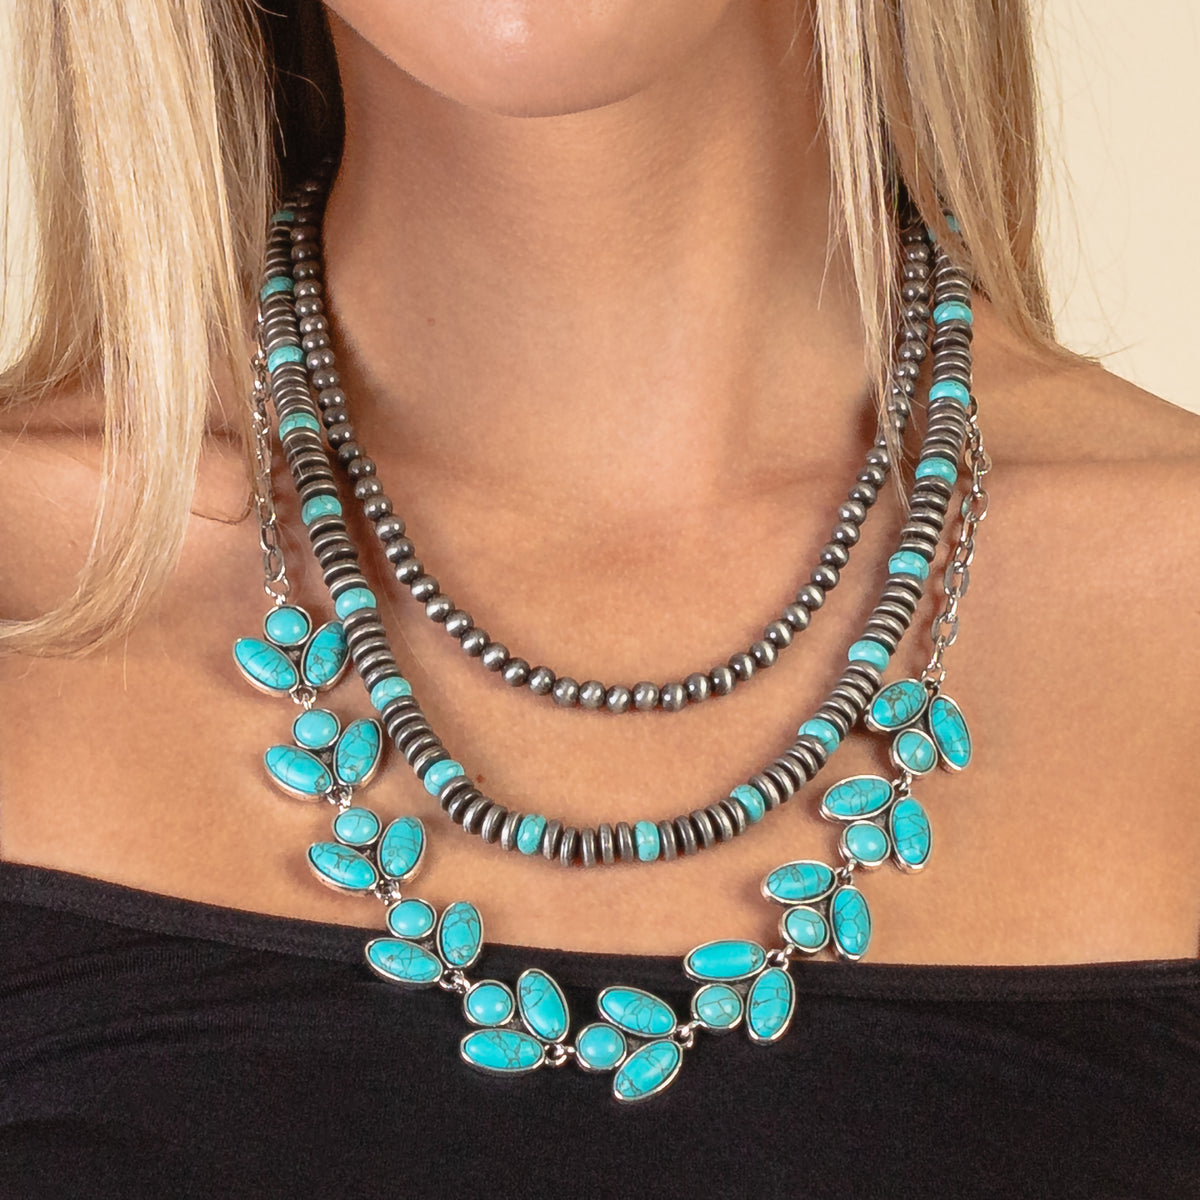 92018 - Squash Blossom Necklace - Turquoise & Silver